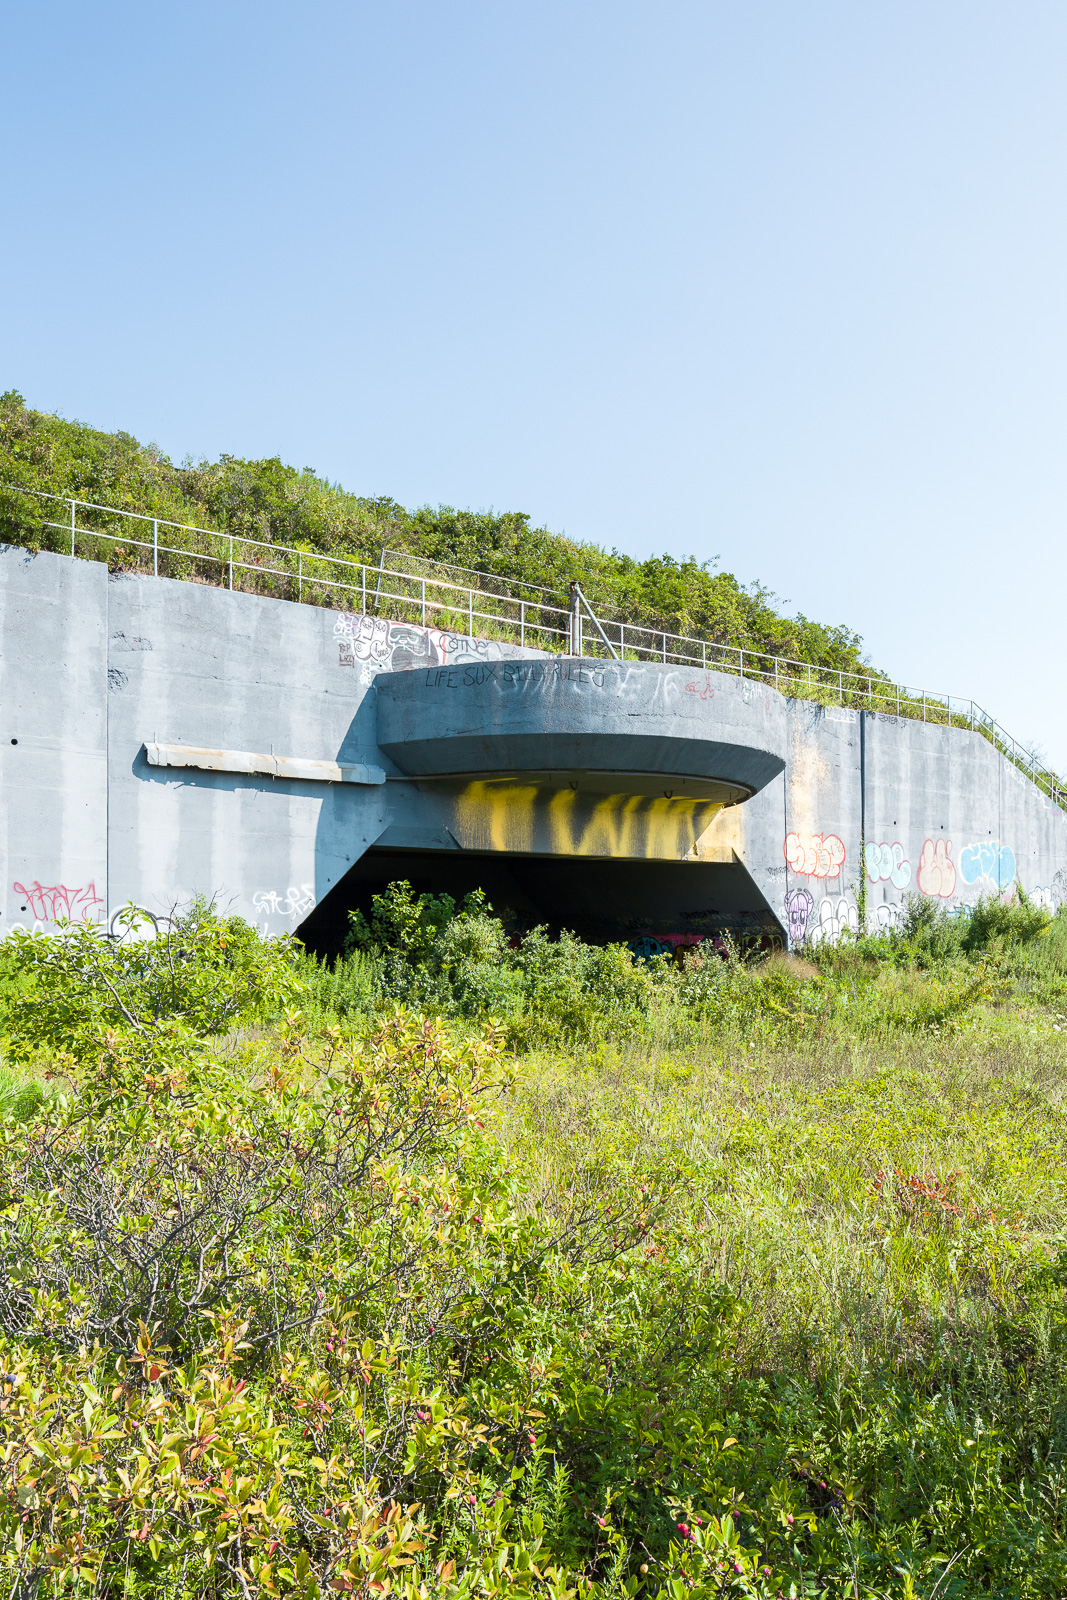 Battery Harris at Fort Tilden. Photo by Jason R. Woods